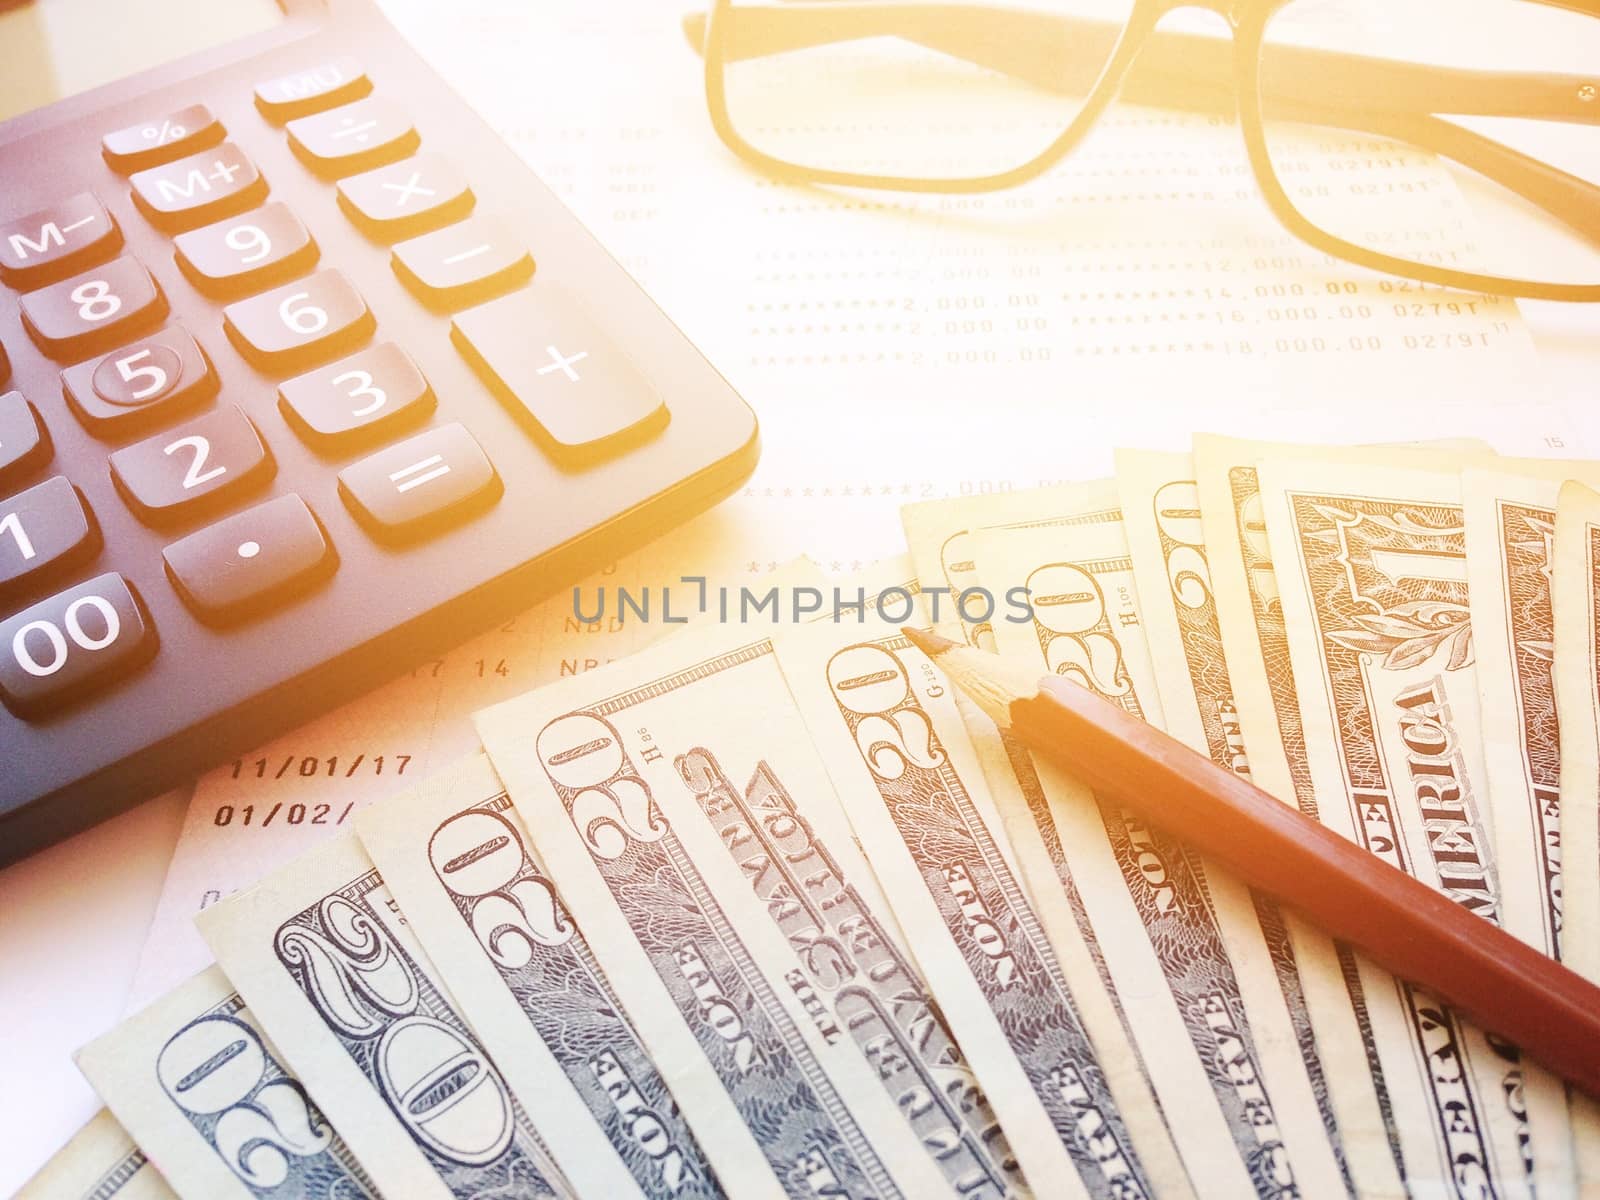 Business, finance, savings, banking or  loan concept : Pencil, eyeglasses, calculator, money and savings account passbook or financial statement on white background